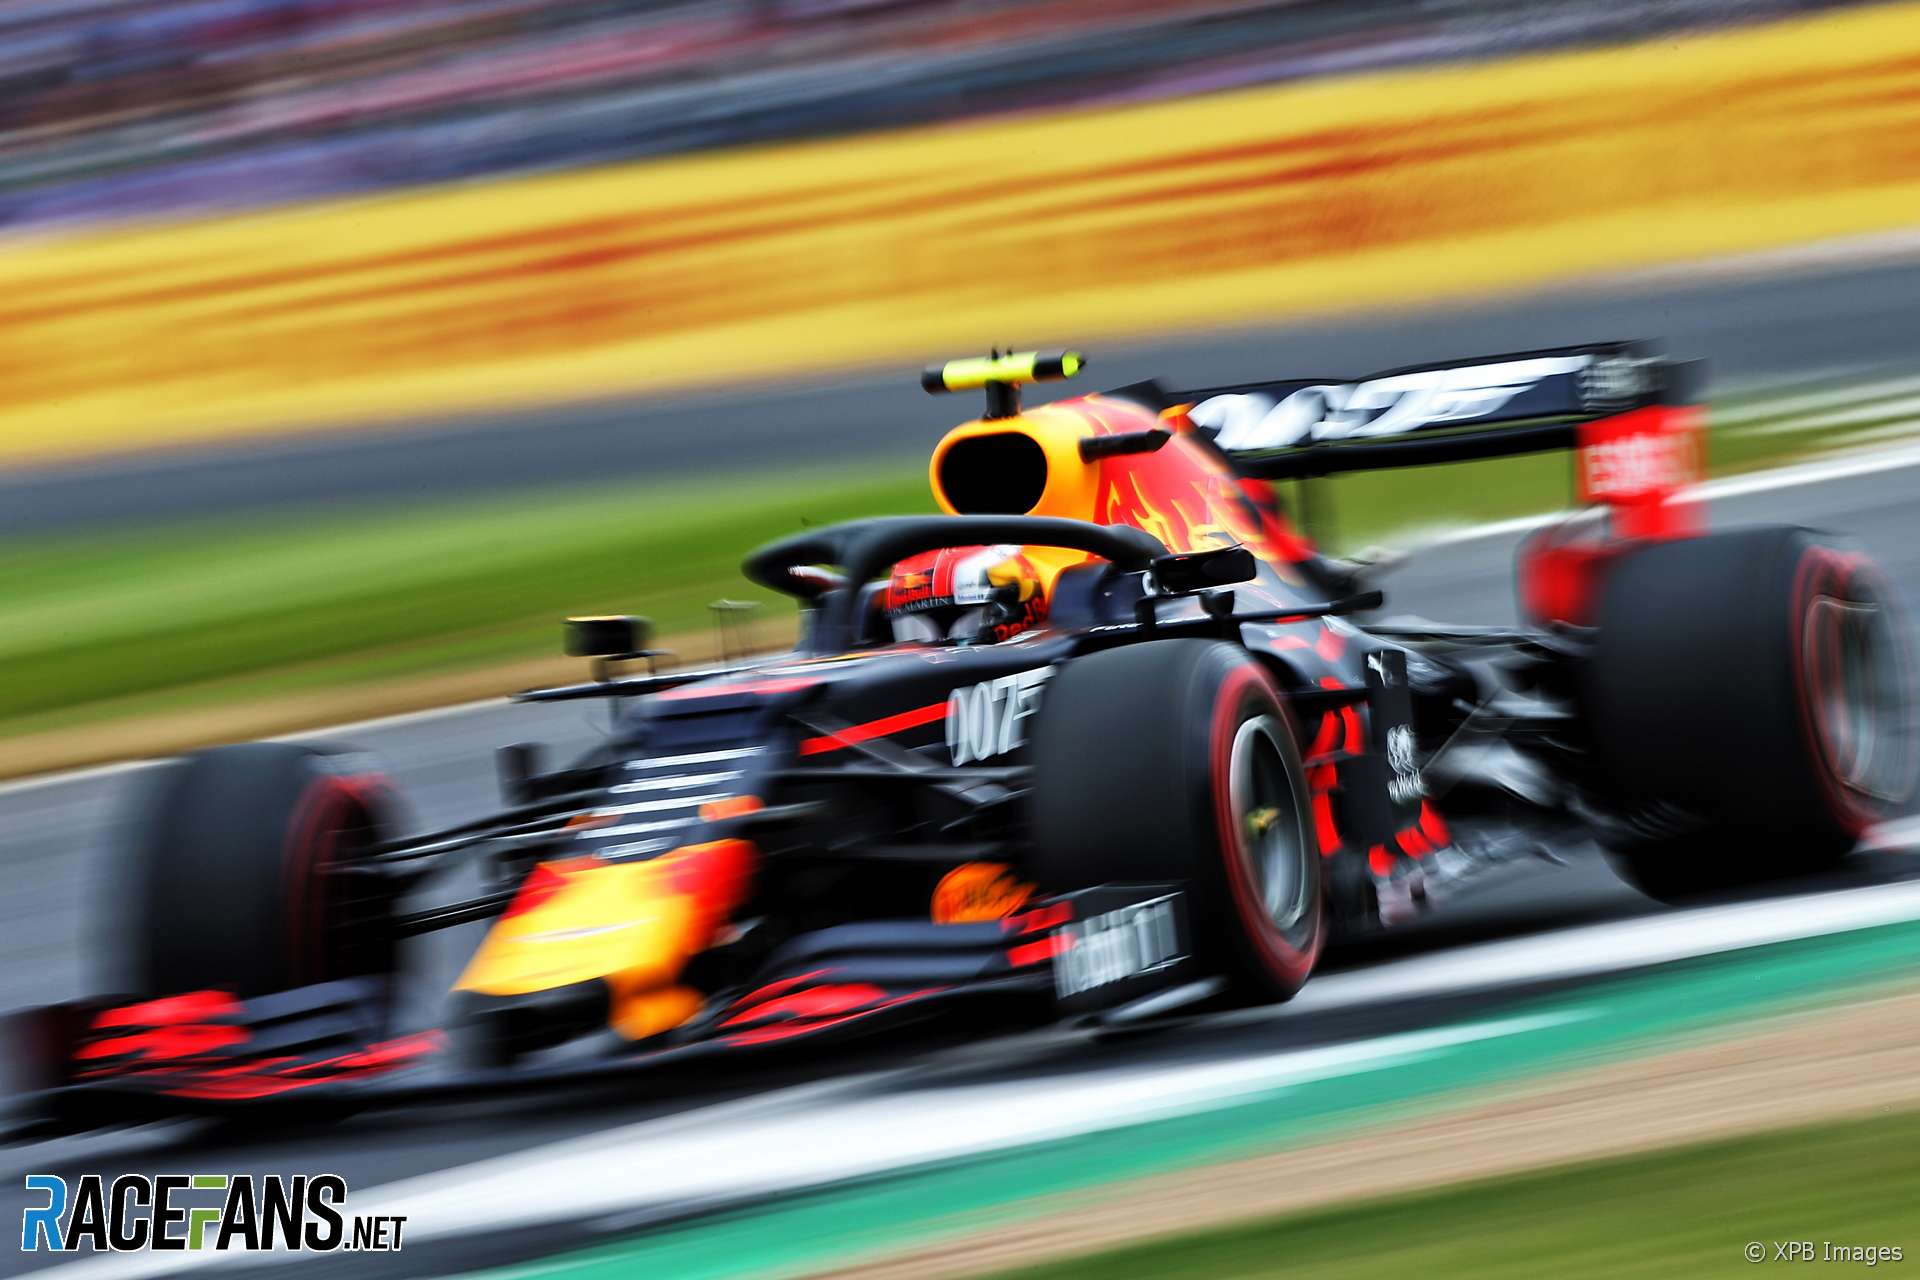 Gasly’s strong weekend down to approach, not set-up – Horner